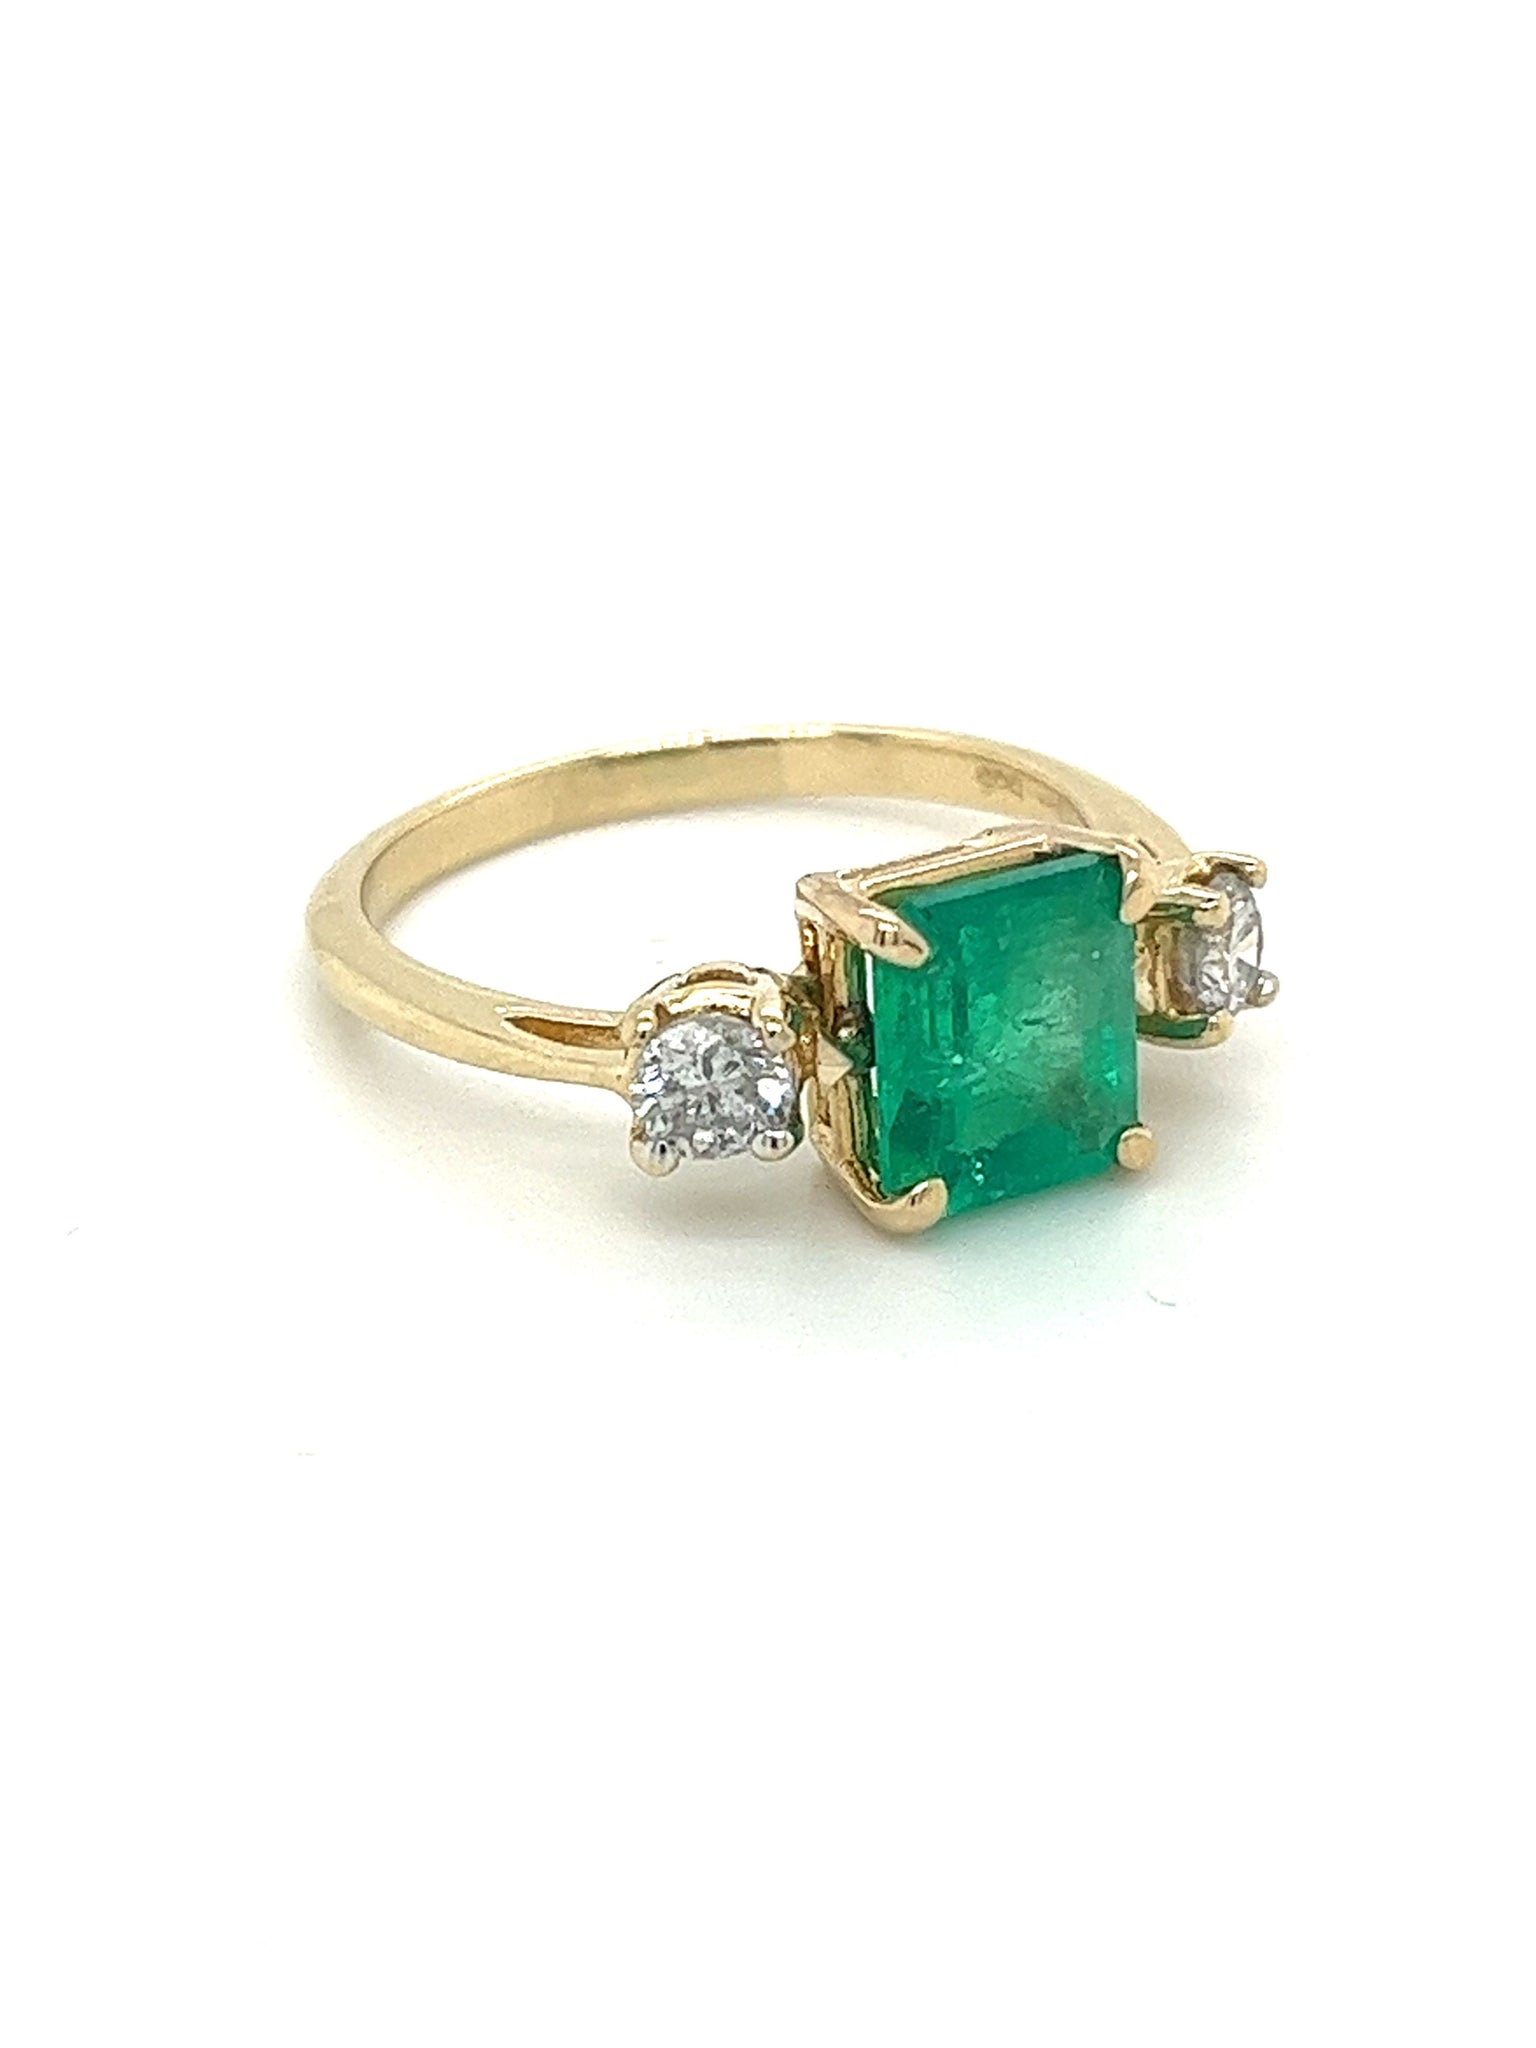 Natural 2.05 Carat Colombian Emerald and Diamond Three-Stone Thin Band Ring in 14K Yellow Gold